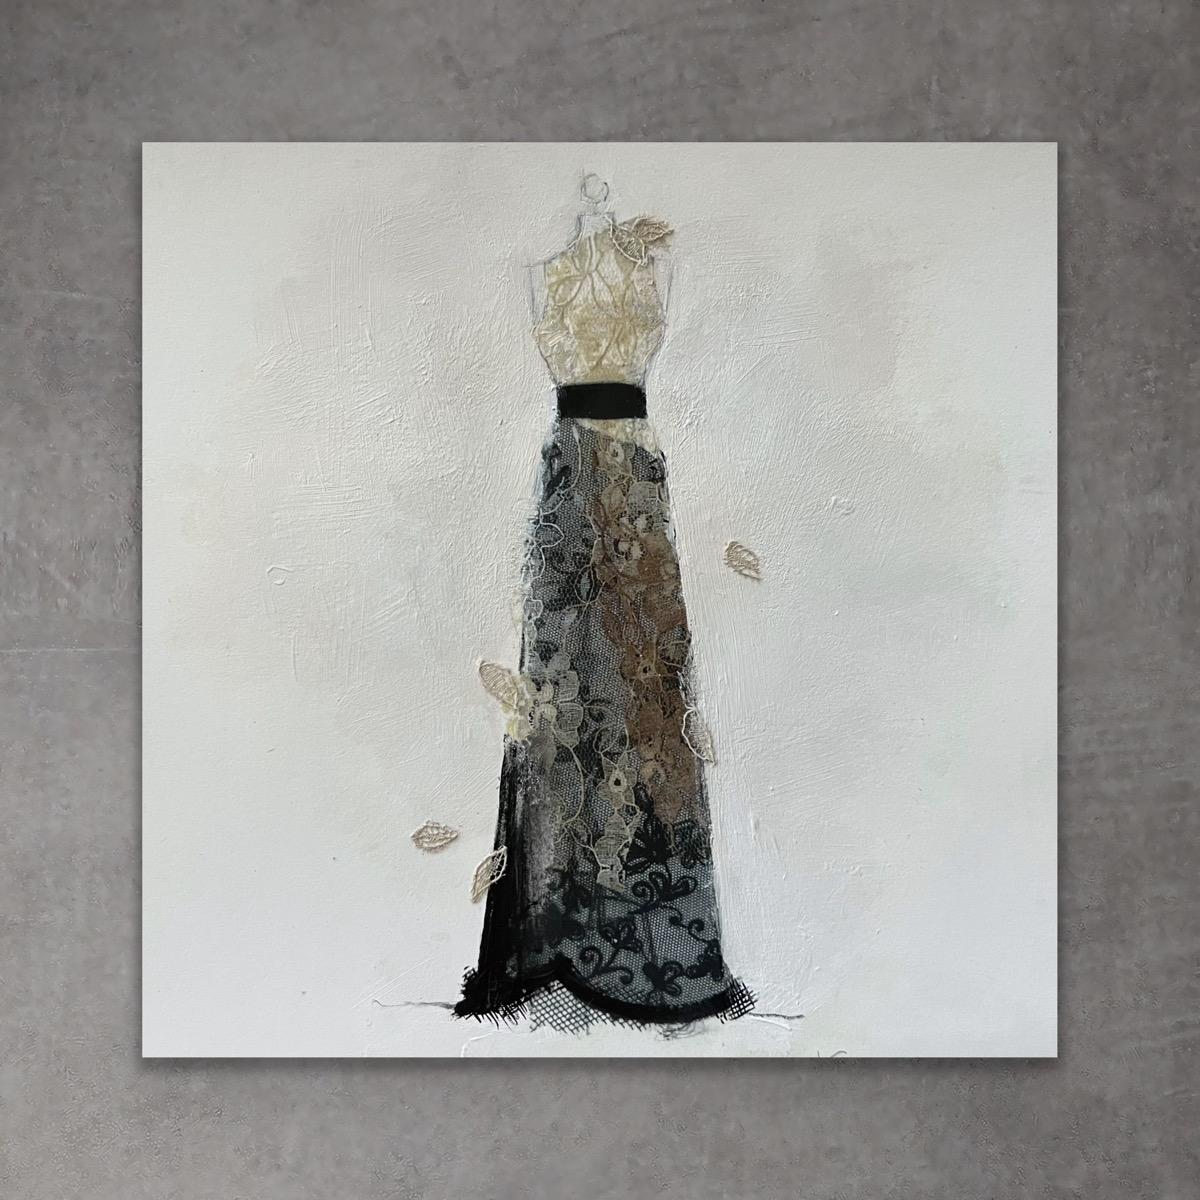 Covered In Lace , 8"x8", Giclée Print With Hand Embellishments, Black And White